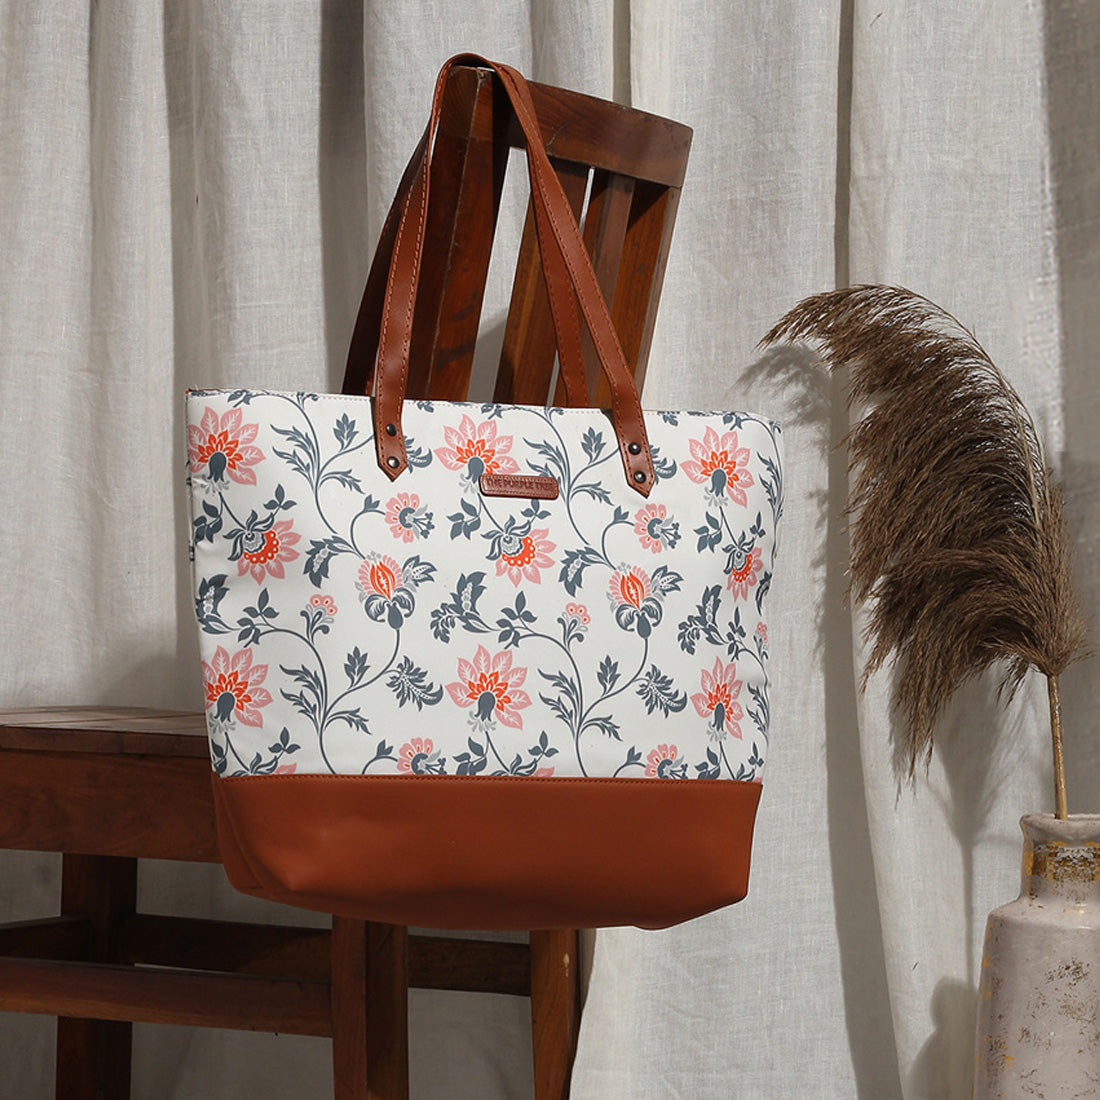 1. Leather floral print tote bag with brown handle.